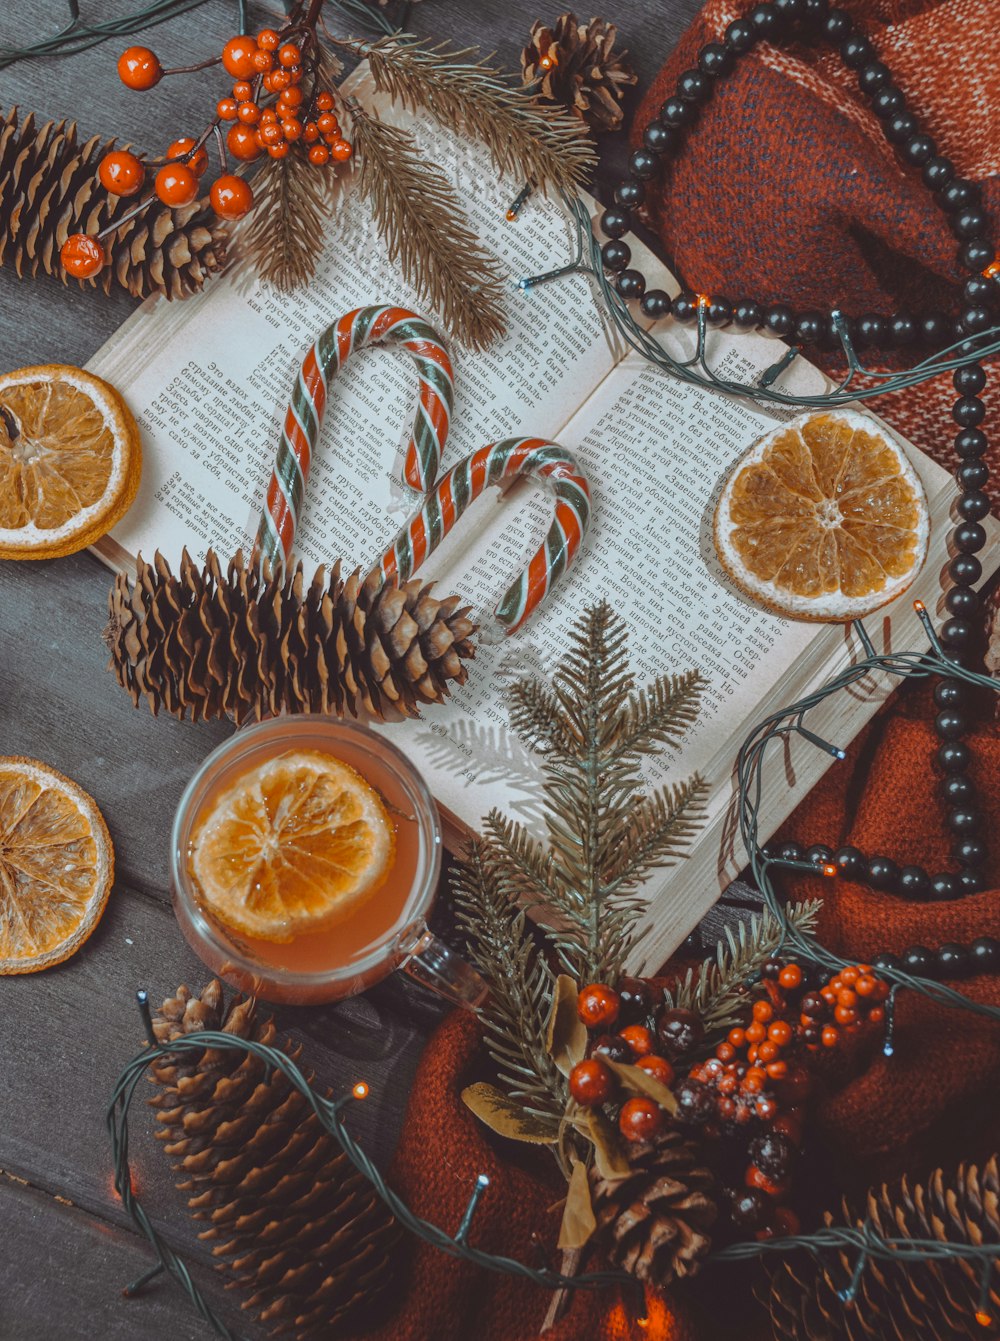 an open book surrounded by orange slices and christmas decorations